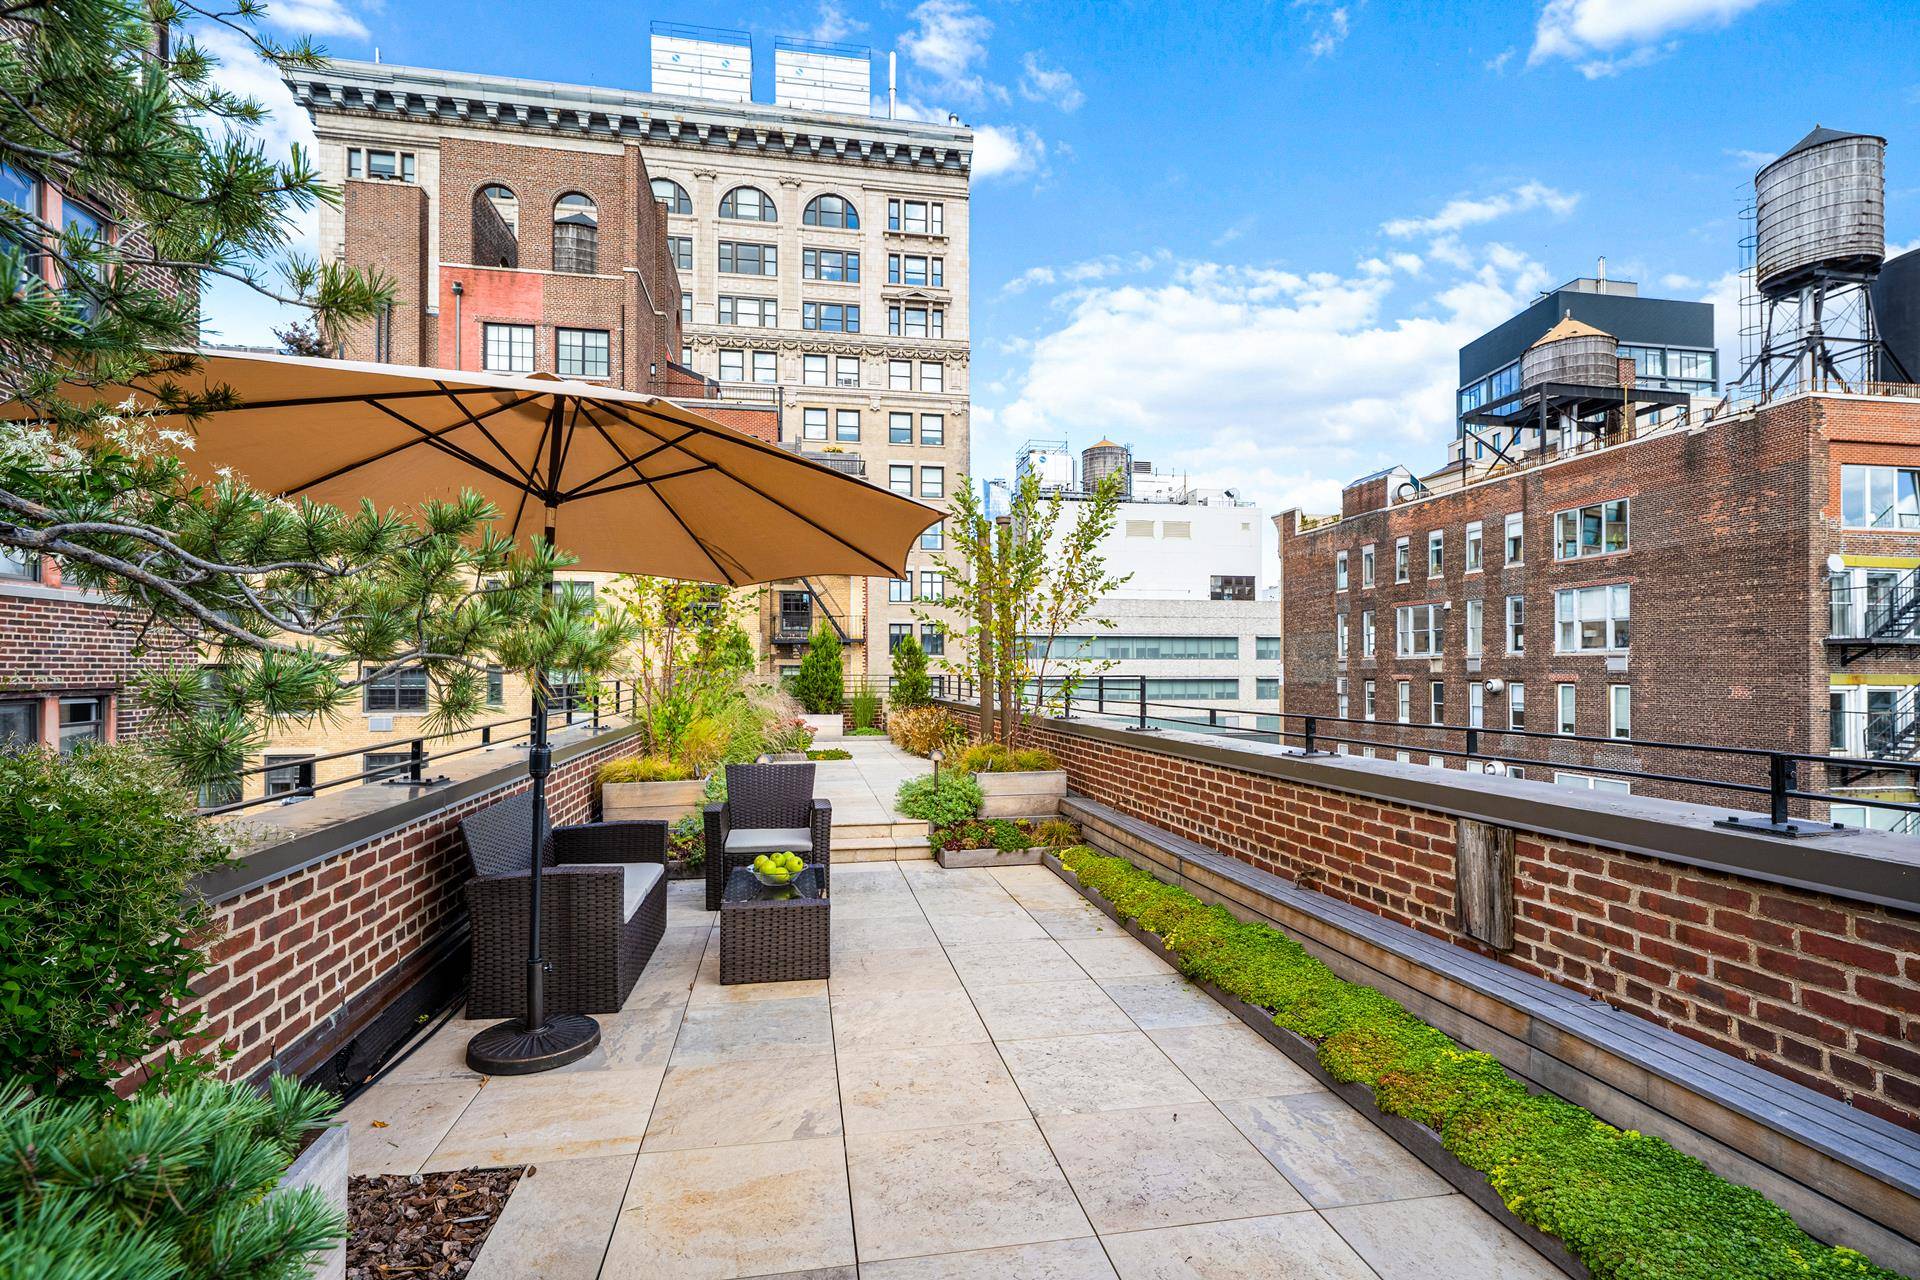 SPECTACULAR GOLD COAST PENTHOUSEThe magic of this grand, designer renovated terraced penthouse begins with the building's unbeatable location on prime Greenwich Village's Fifth Avenue and continues with its stunning Beaux ...